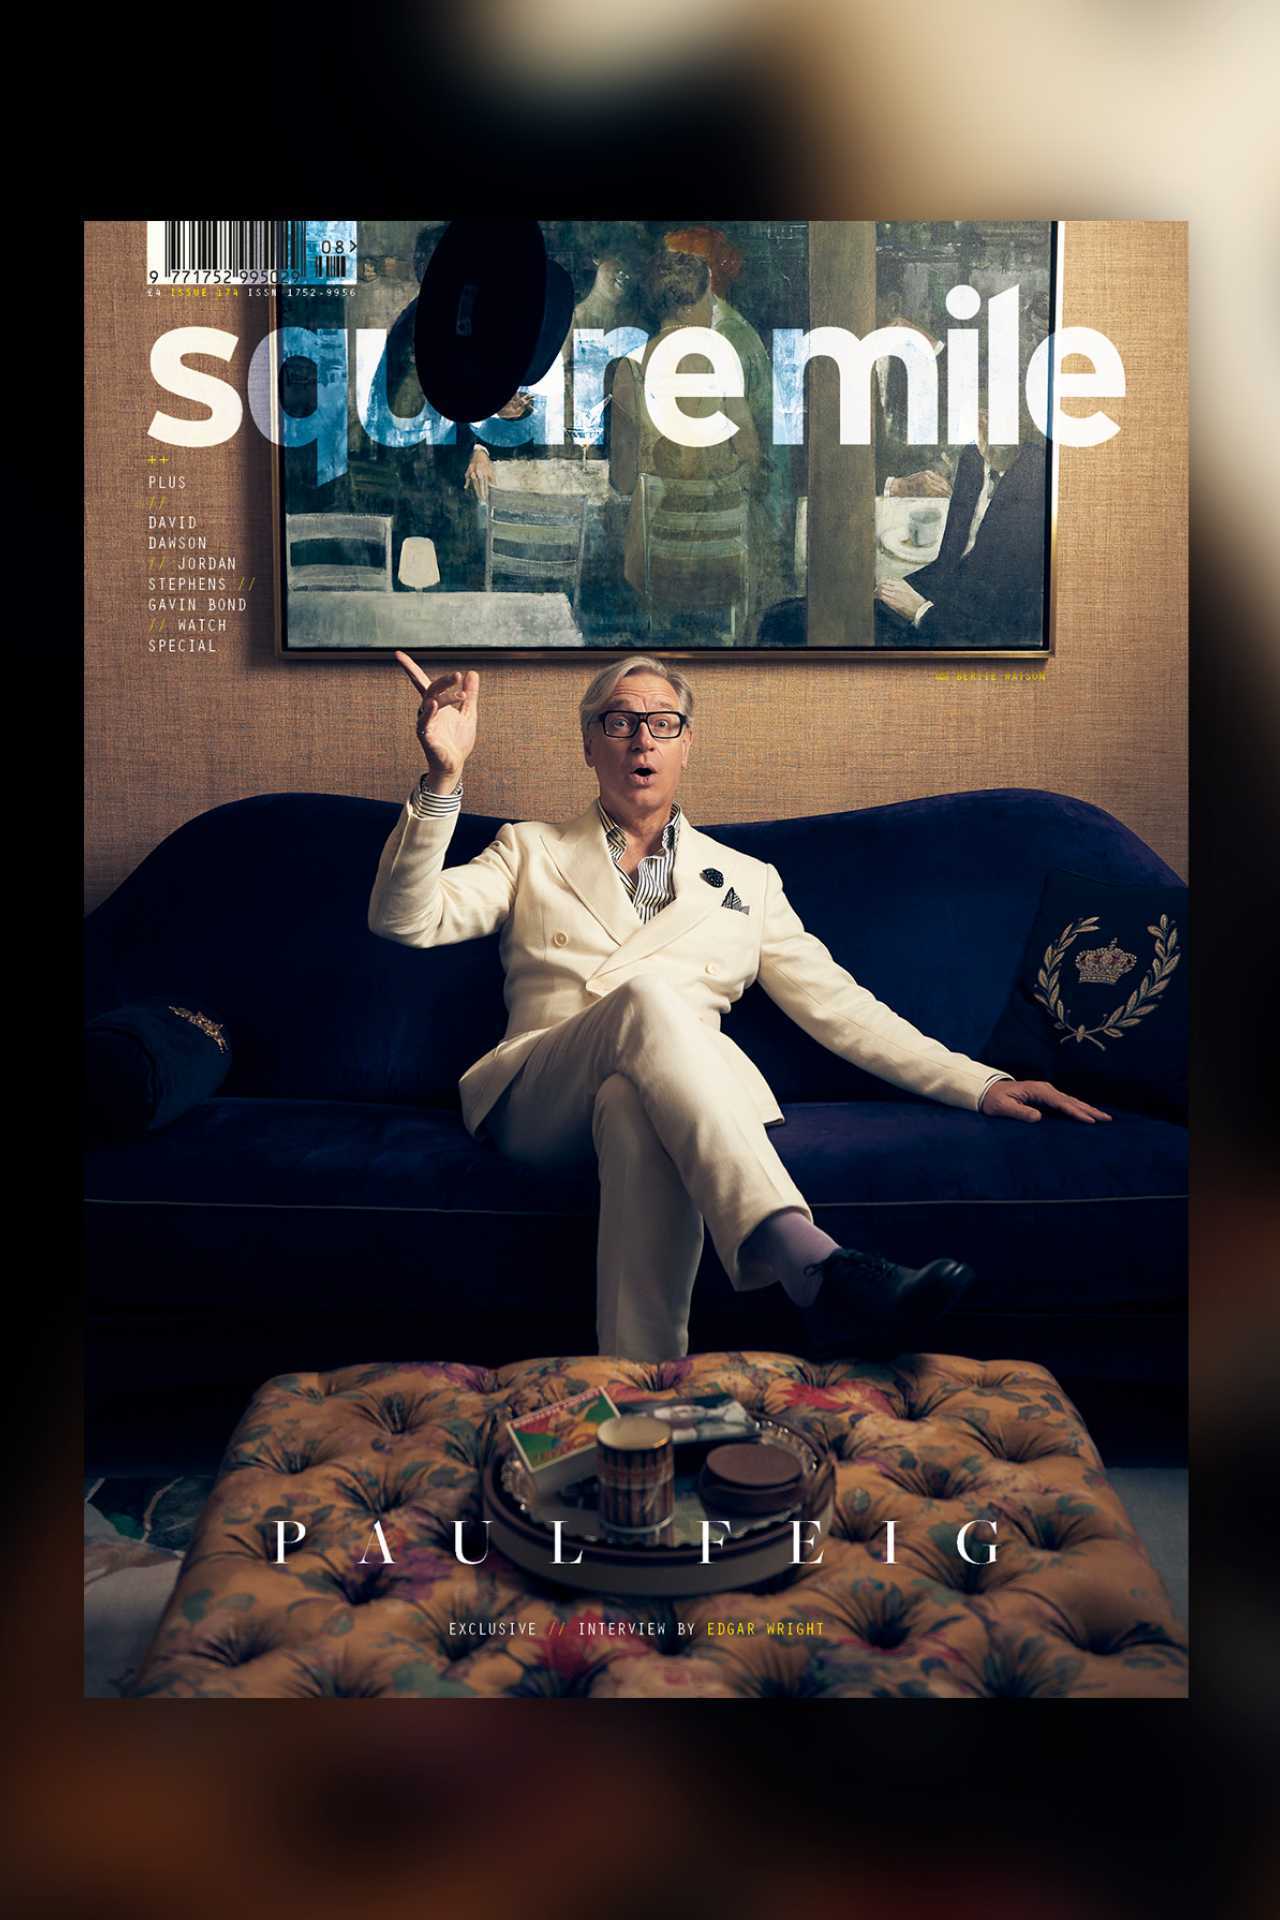 Paul Feig for Square Mile